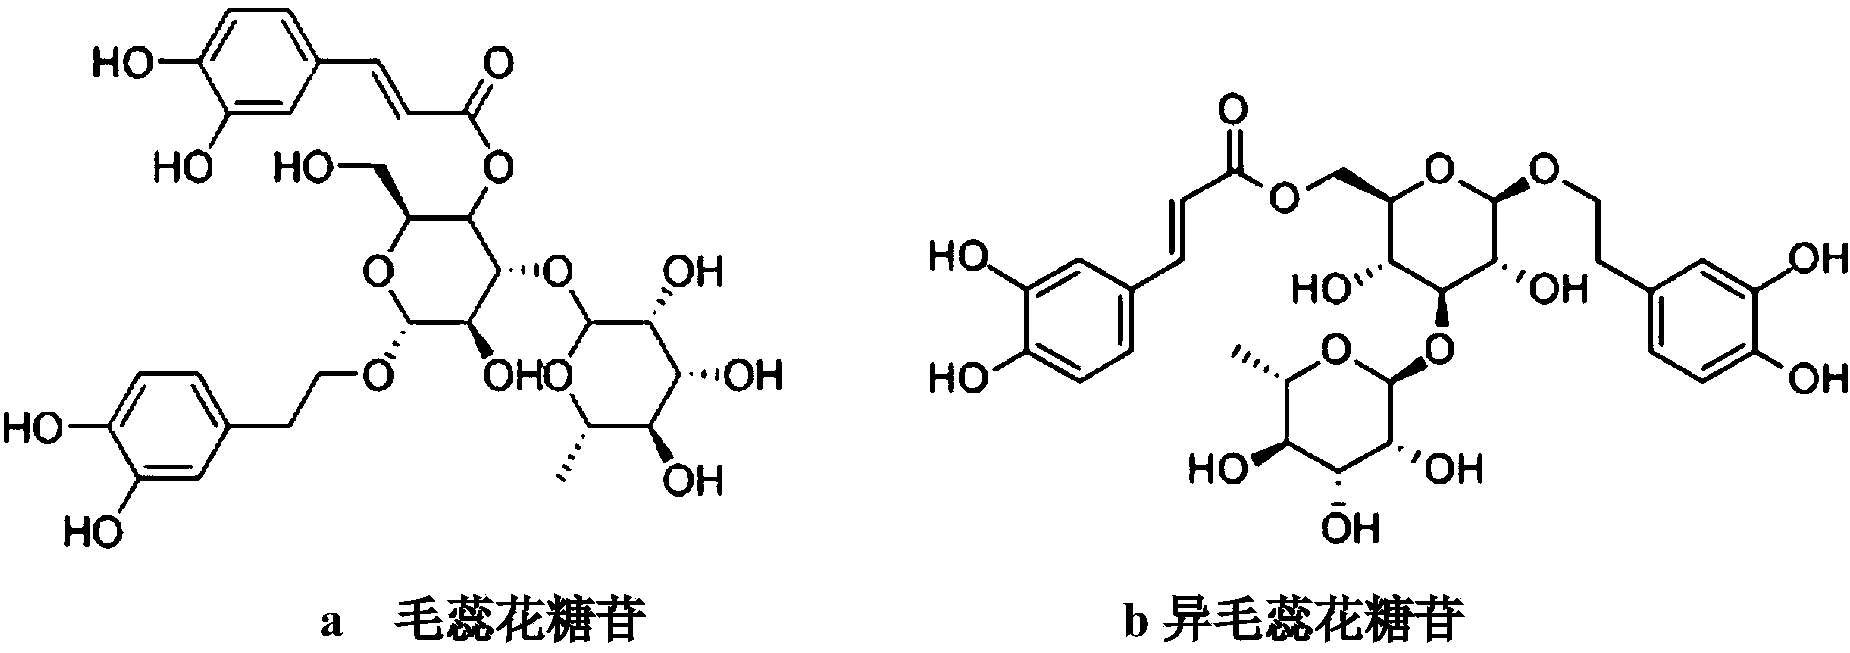 Osmanthus phenylethanoid glycoside extract, and preparation method and application thereof